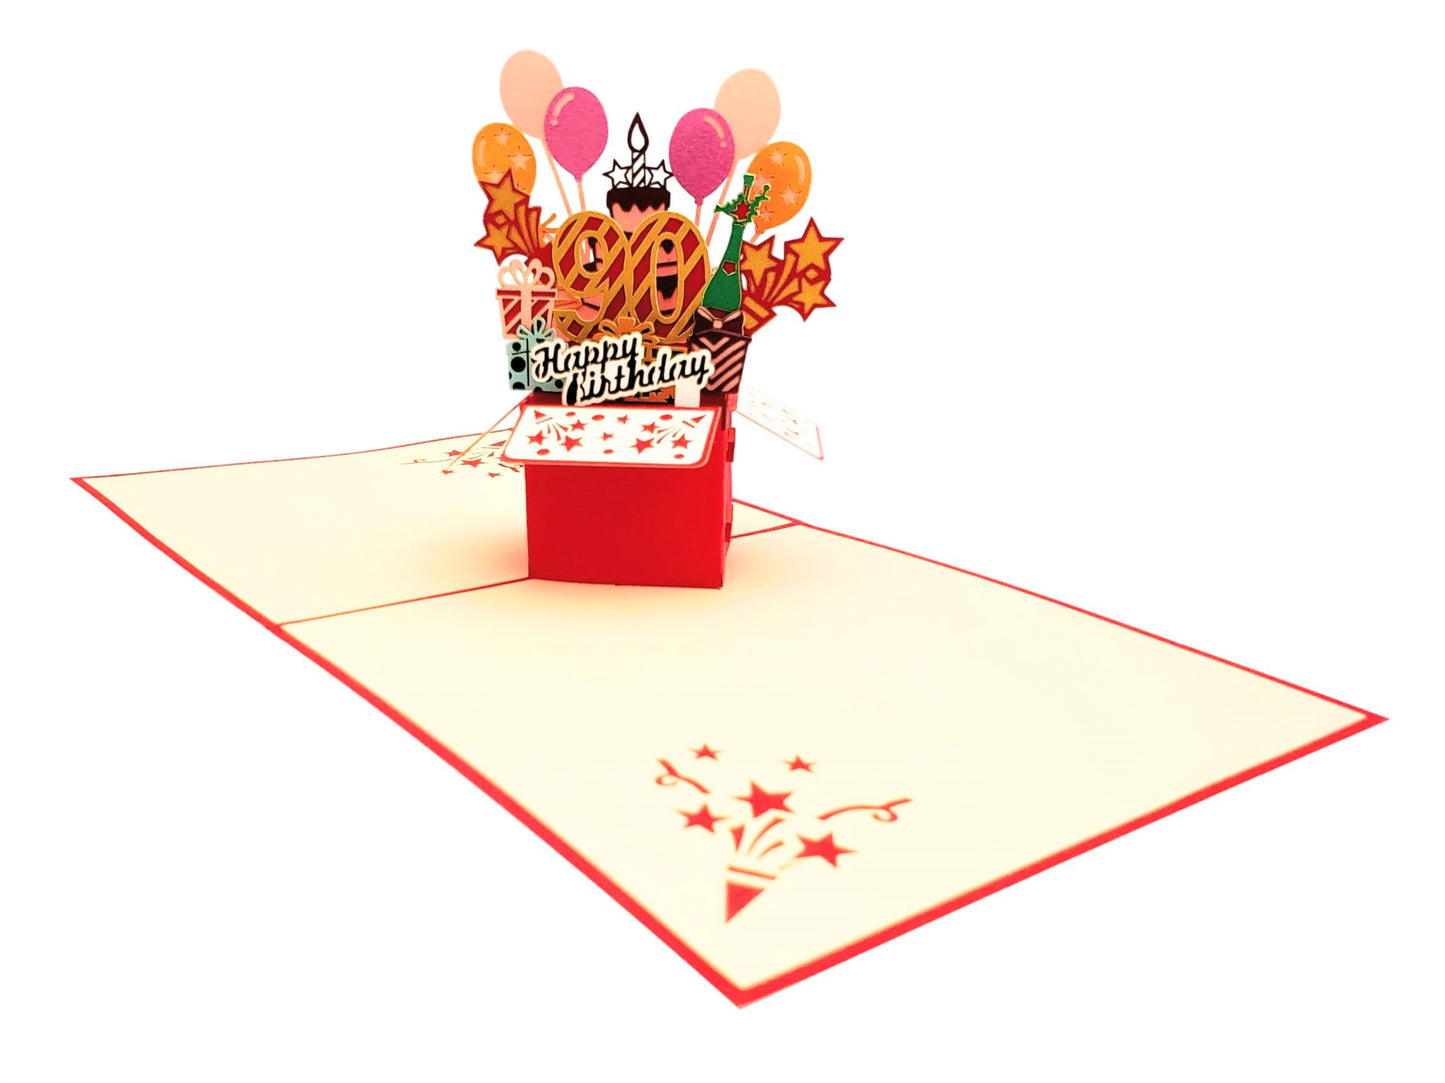 Happy 90th Birthday Red Party Box 3D Pop Up Greeting Card - Age - Birthday - Fun - Special Days - iGifts And Cards